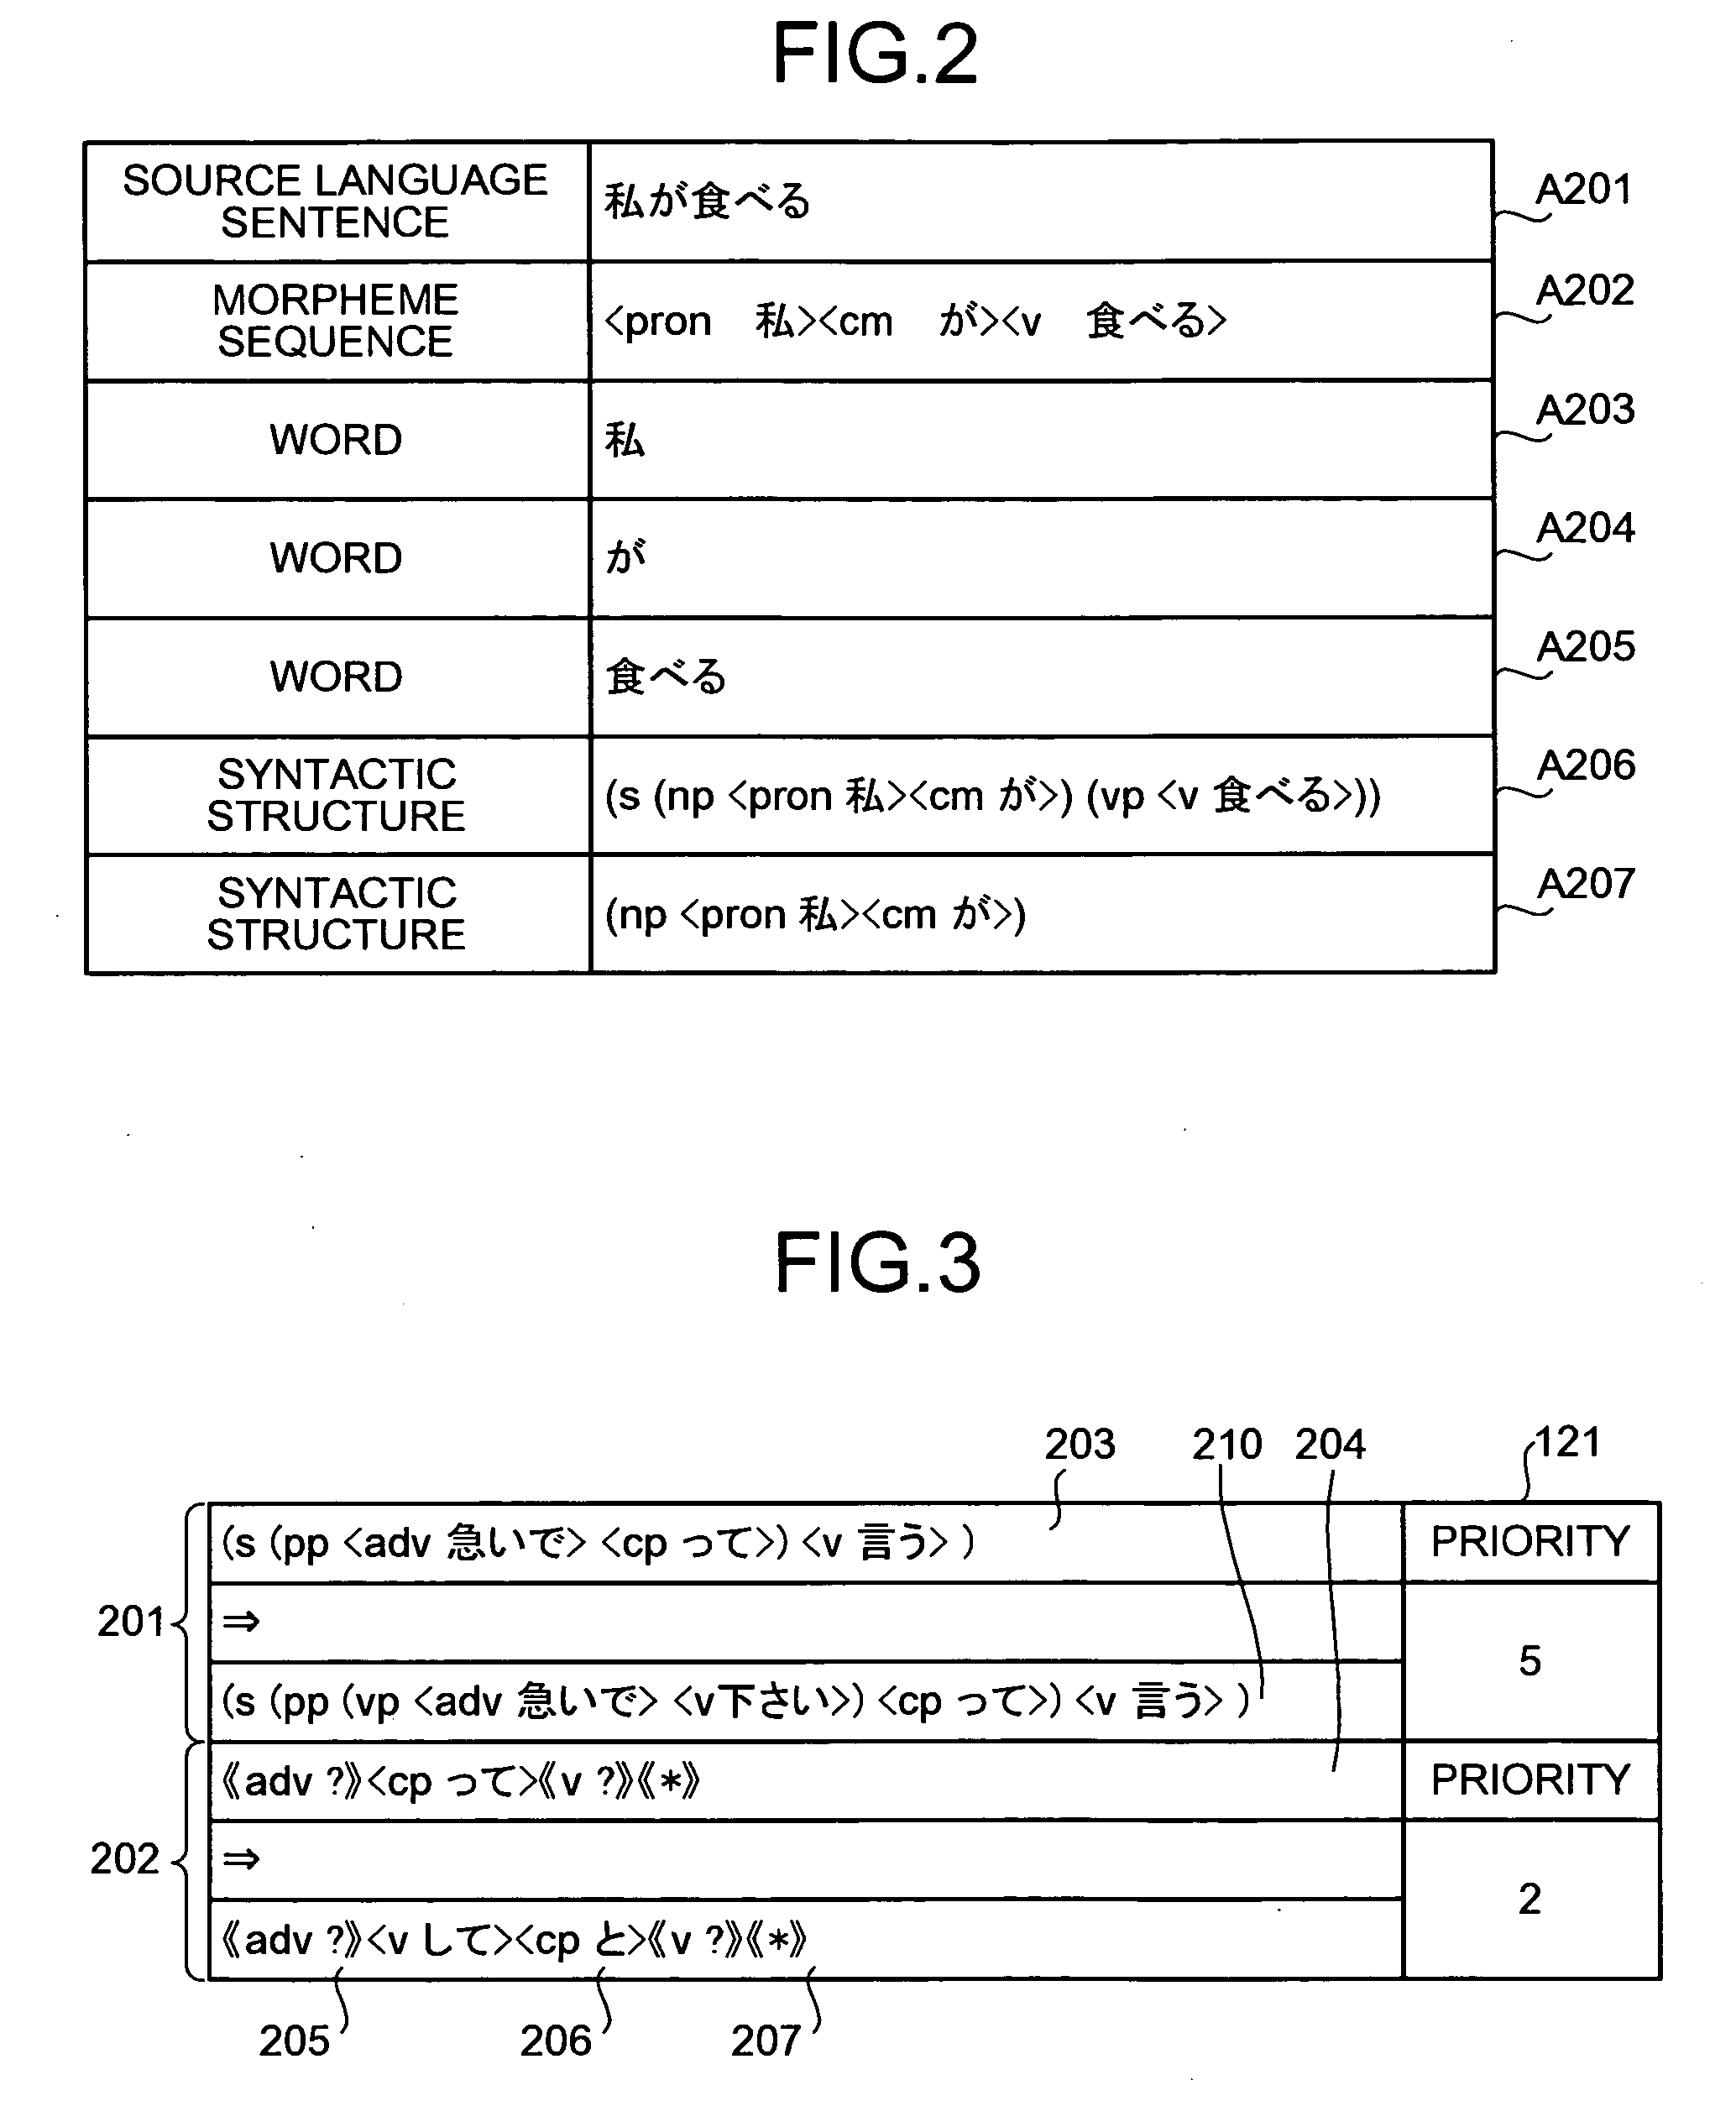 Communication support apparatus and computer program product for supporting communication by performing translation between languages